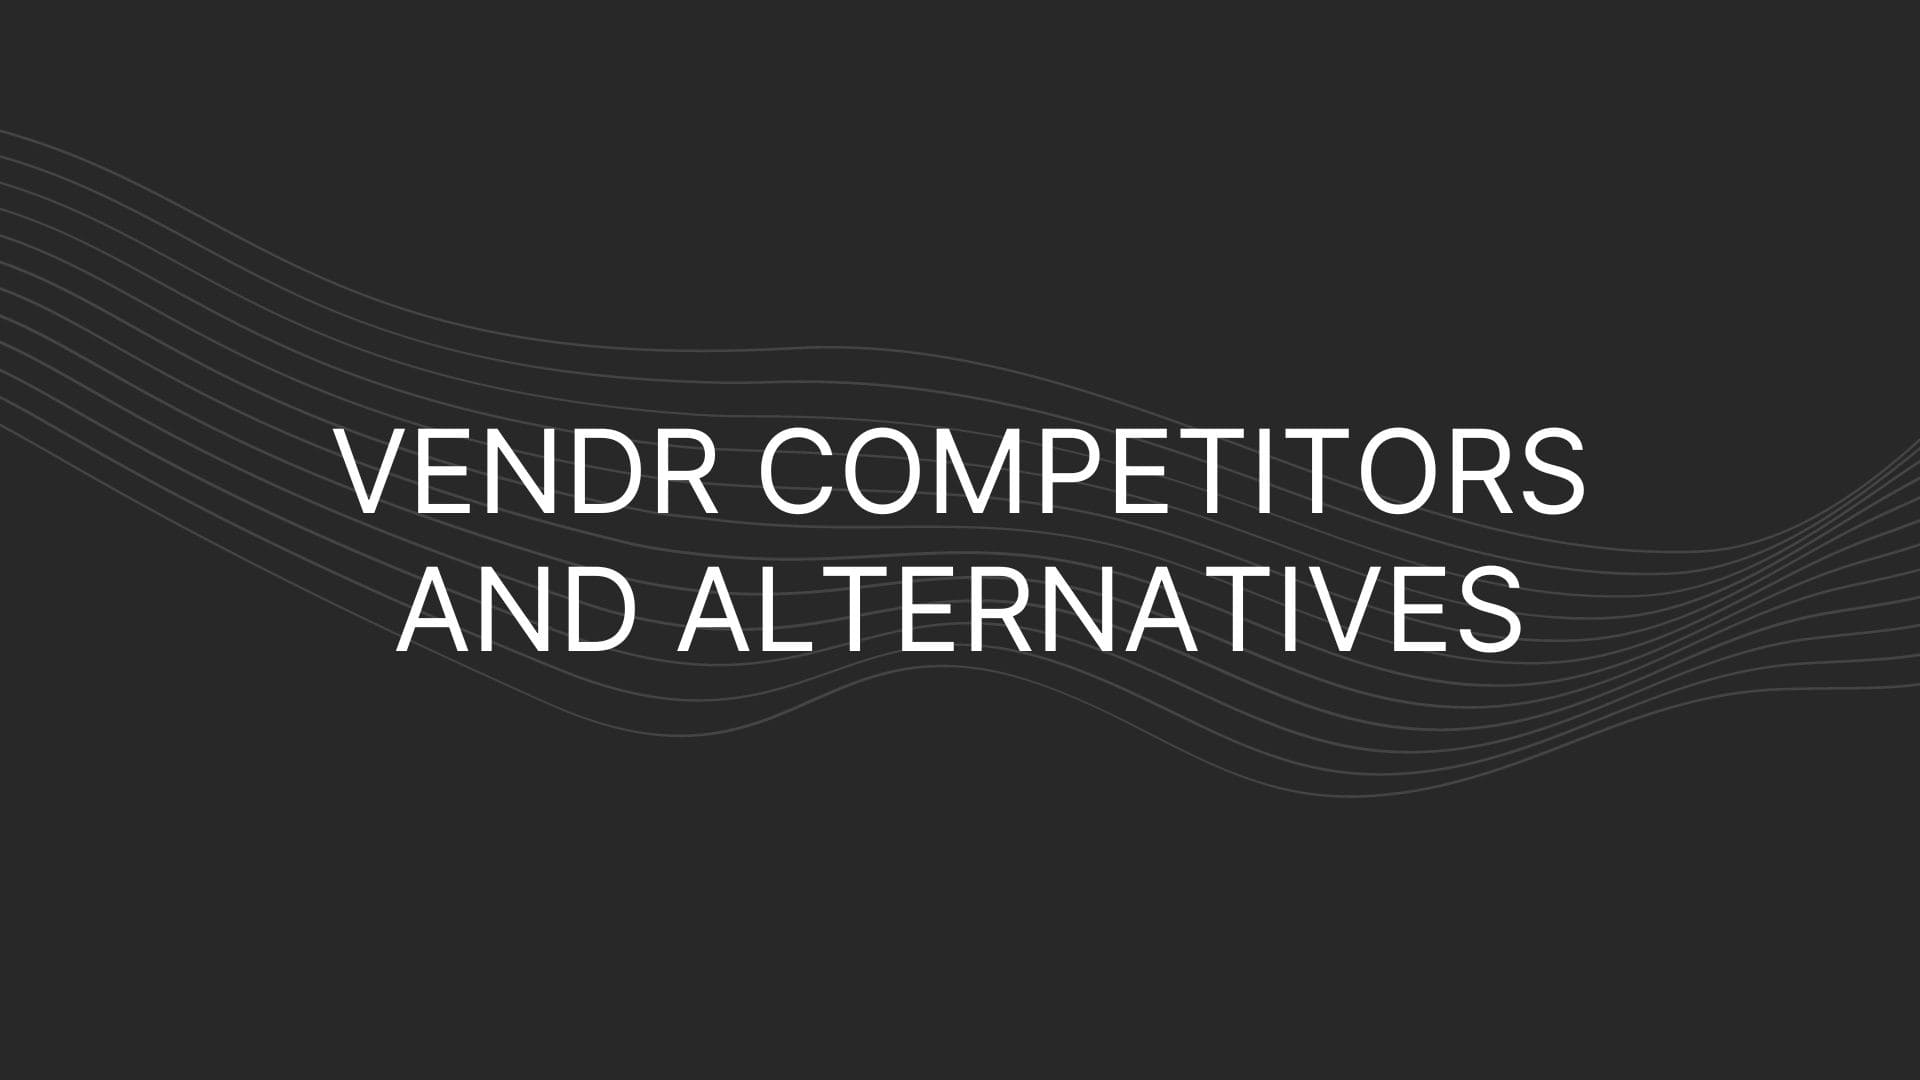 7 Vendr Competitors and Alternatives To Consider